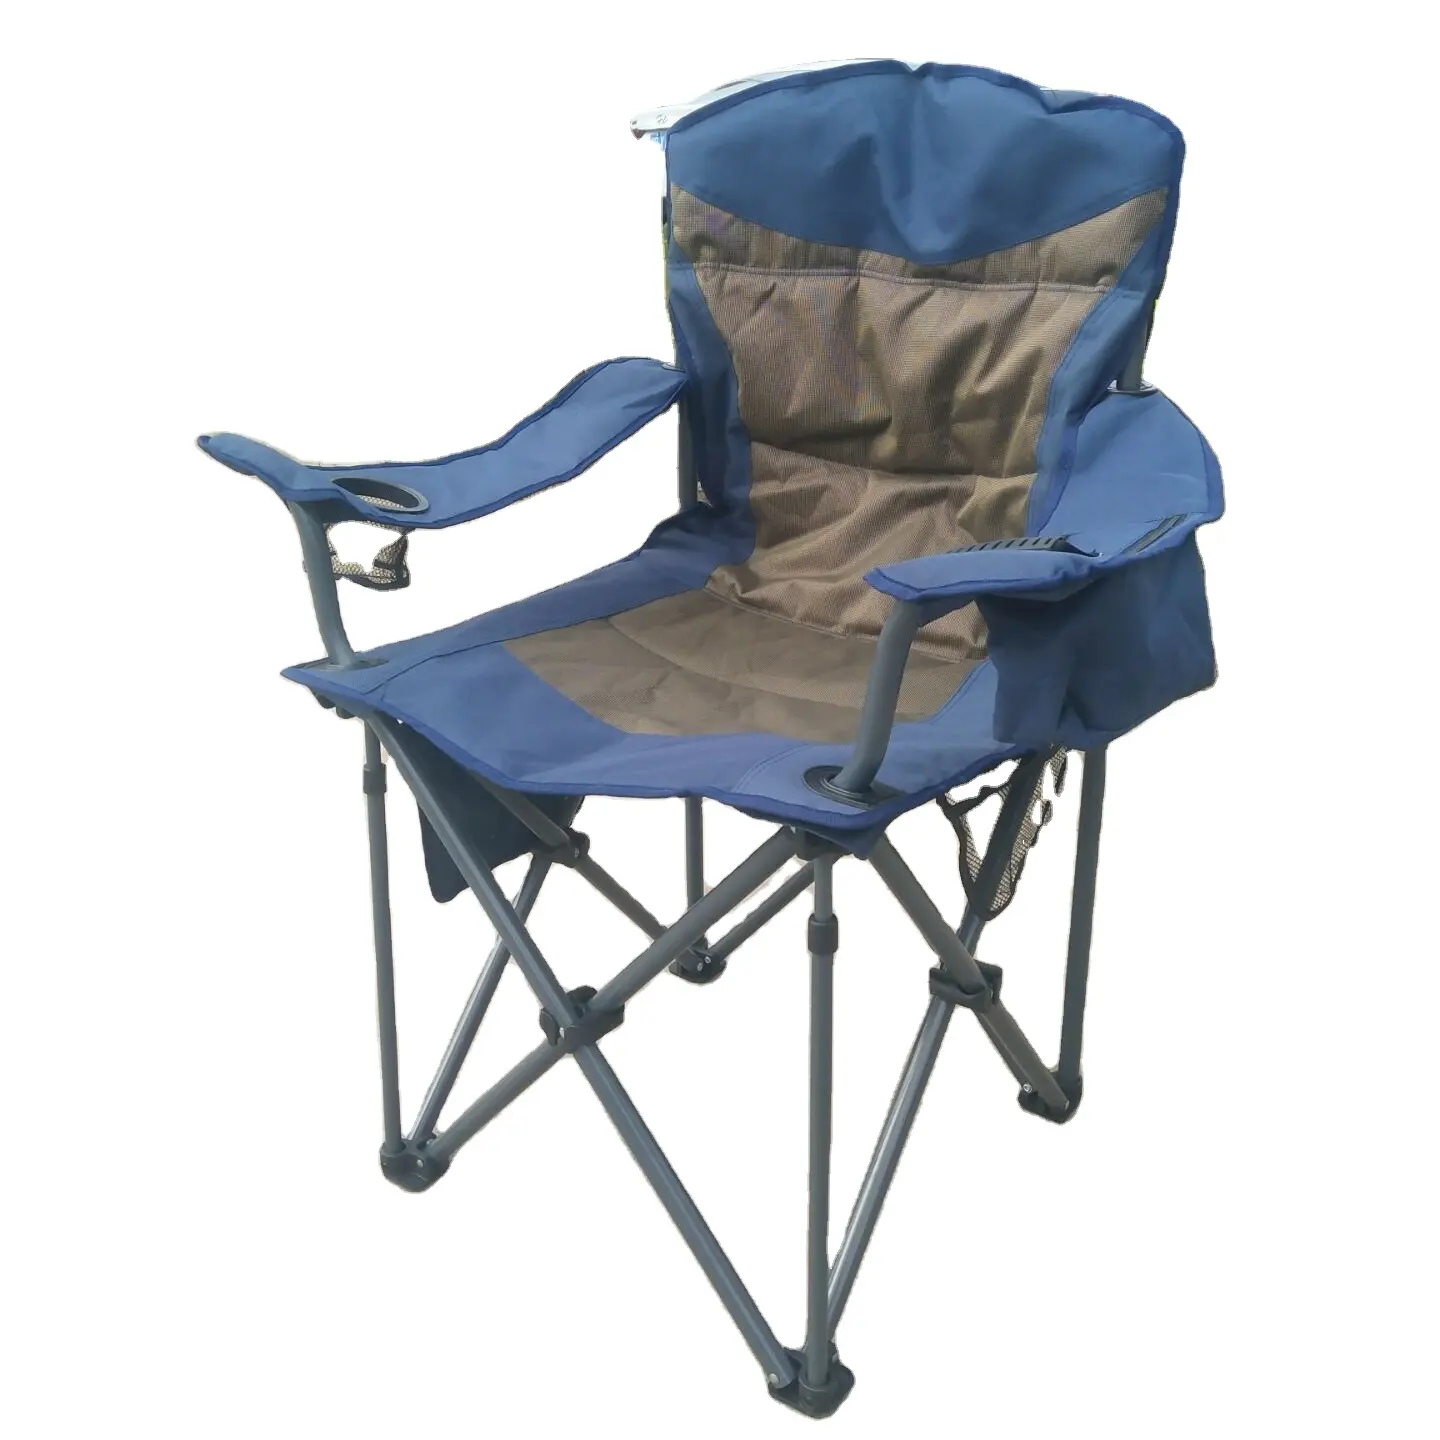 High Quality Outdoor Folding Fishing Camping Chairs with Cooler Bag